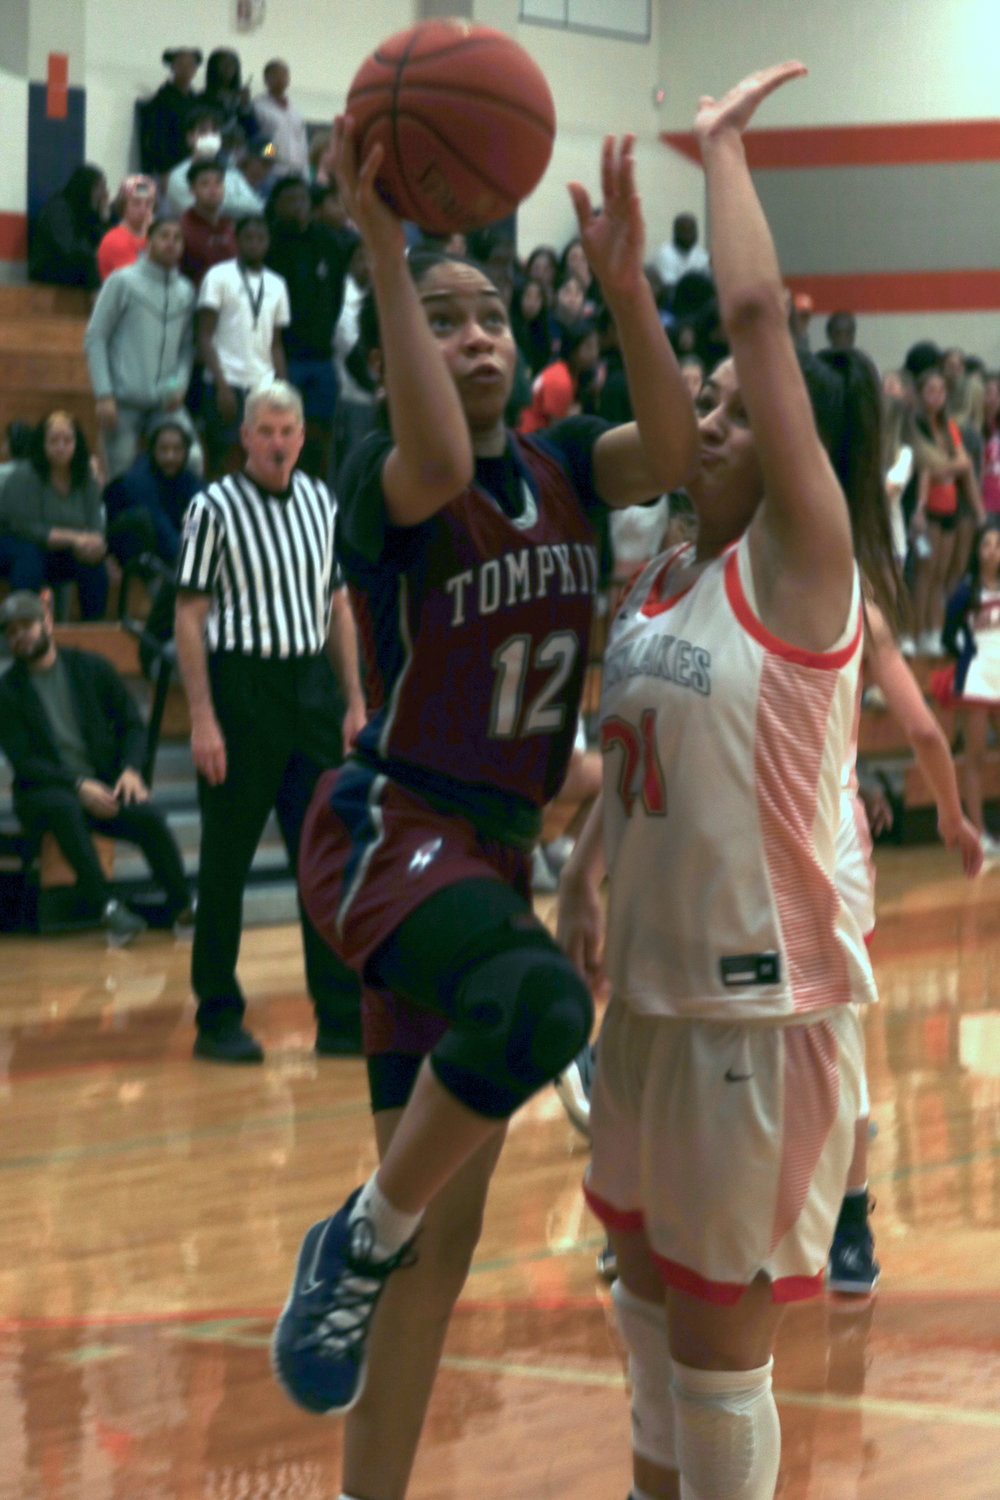 Tompkins’ Brooklynn Nash shoots a layup during Tuesday’s game against Seven Lakes at the Seven Lakes gym.